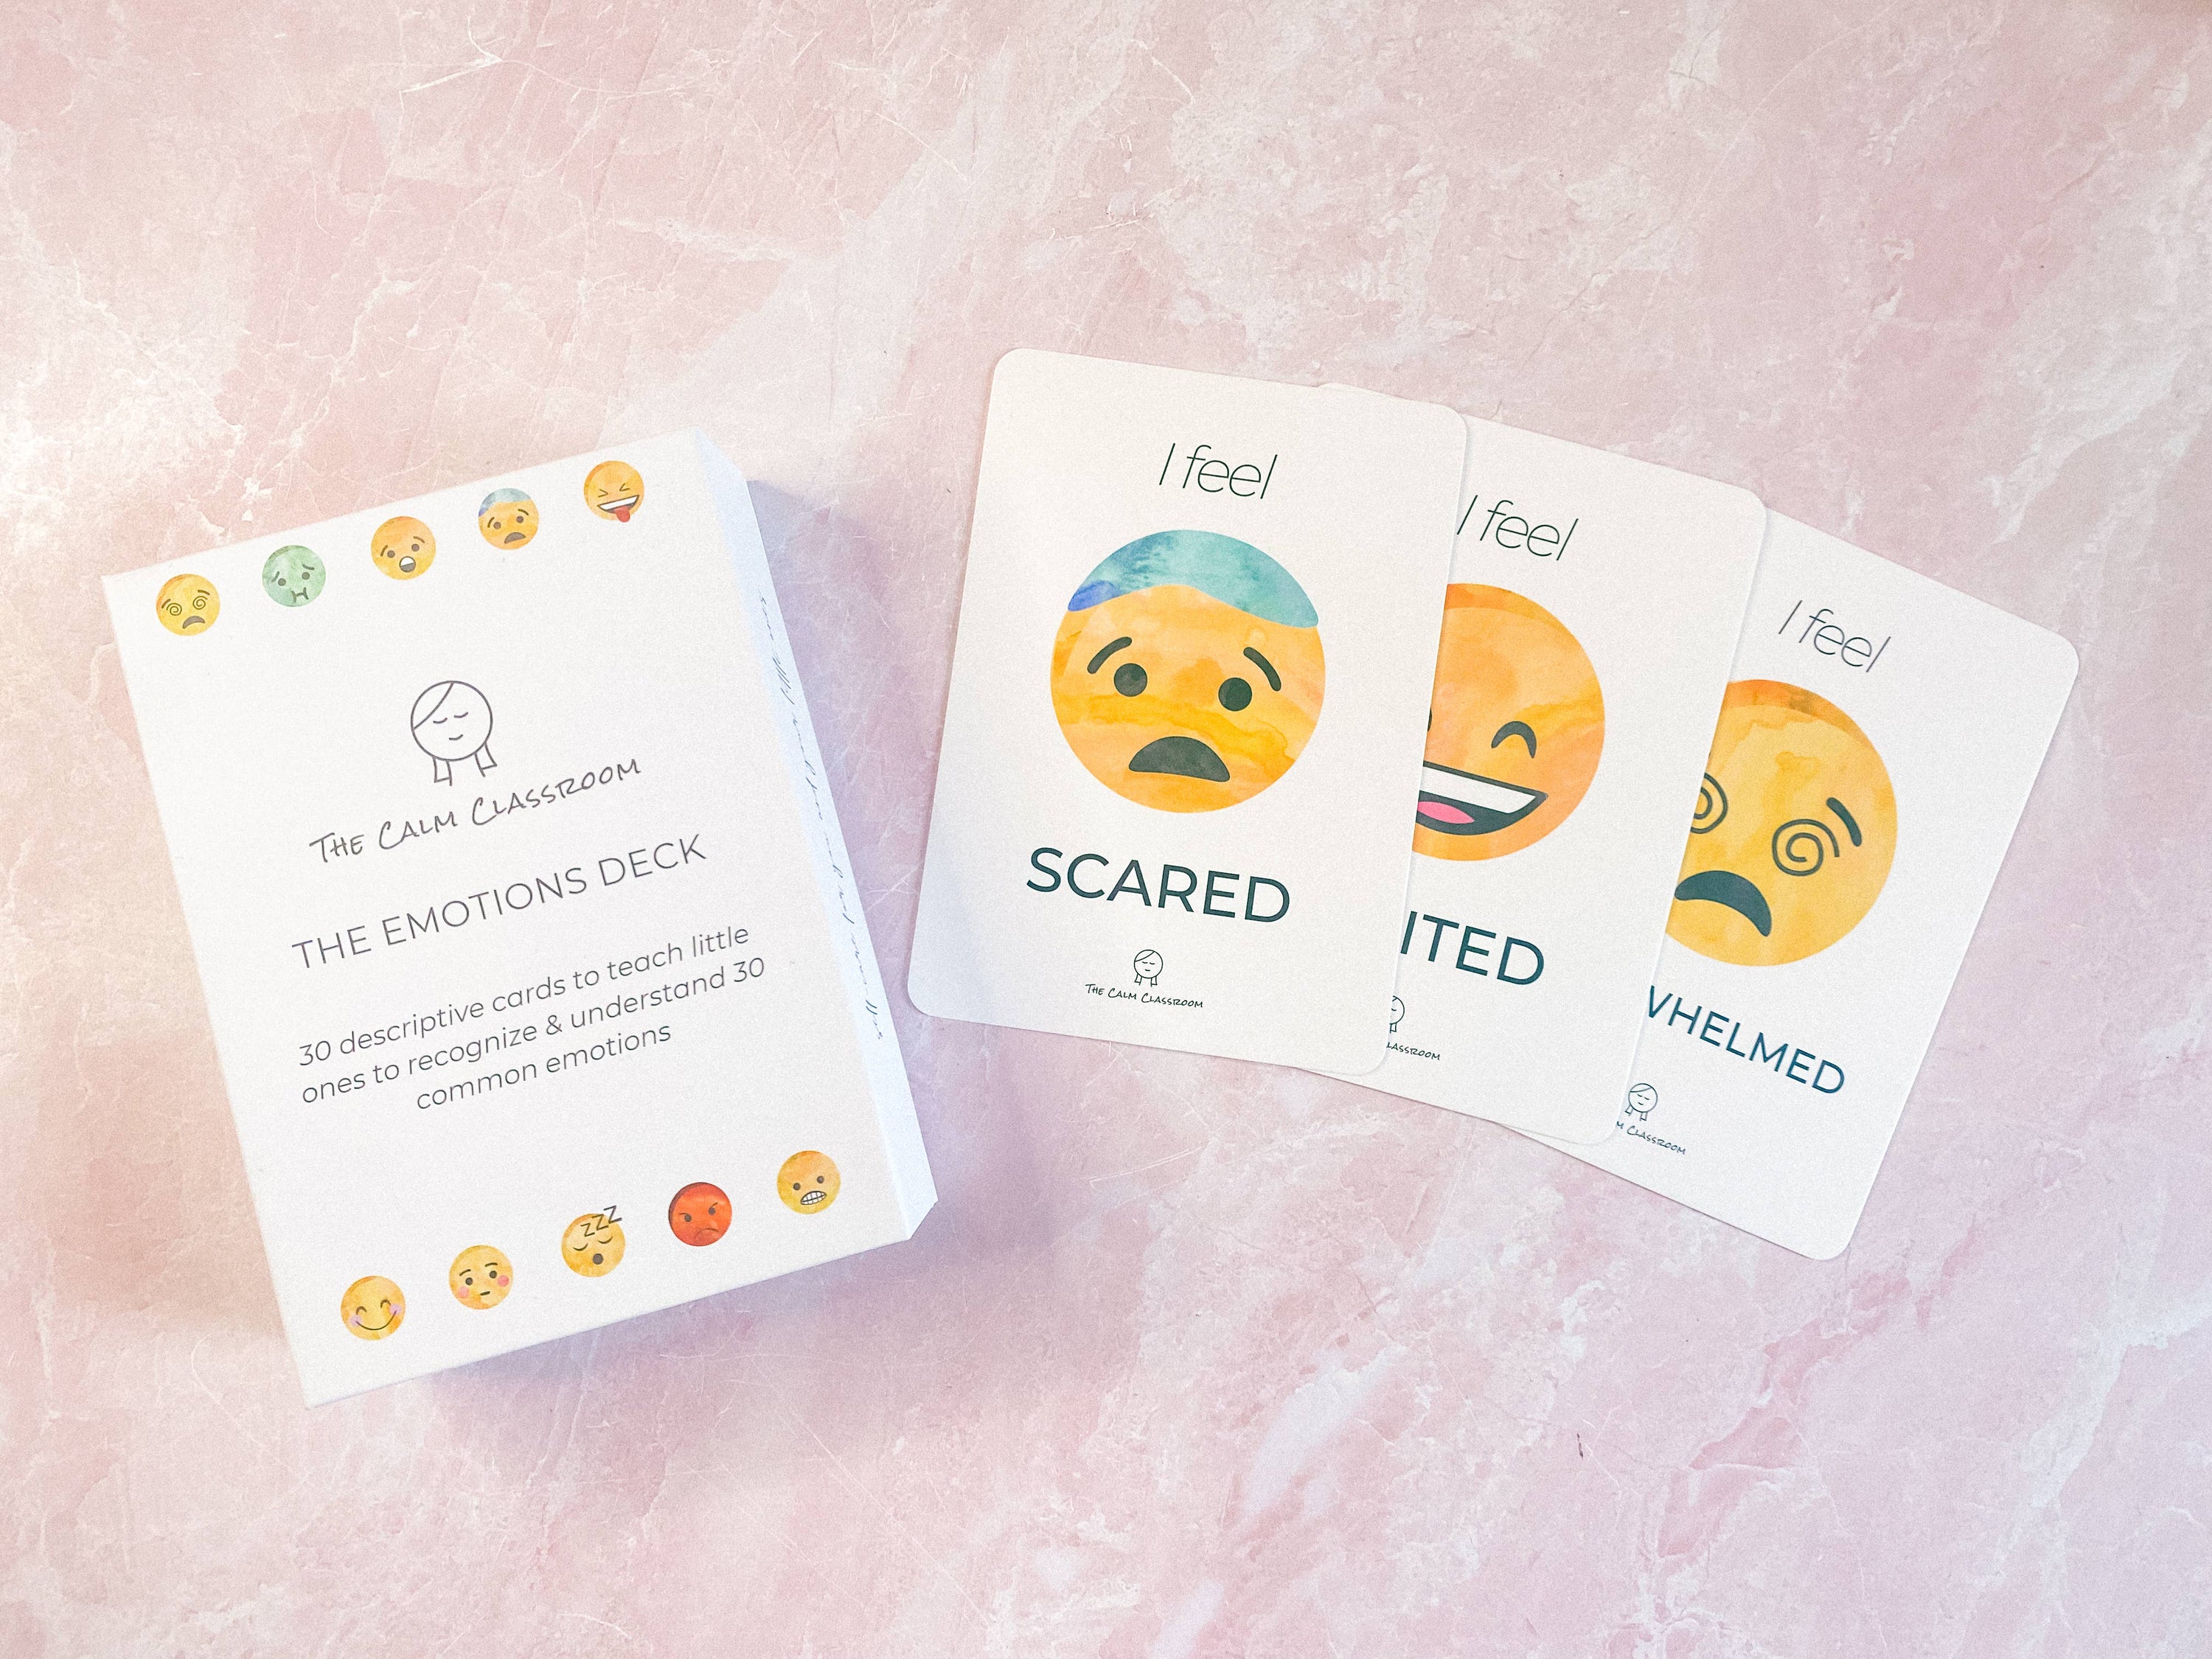 A display of several of the emoji cards expressing certain feelings, including: I feel scared.